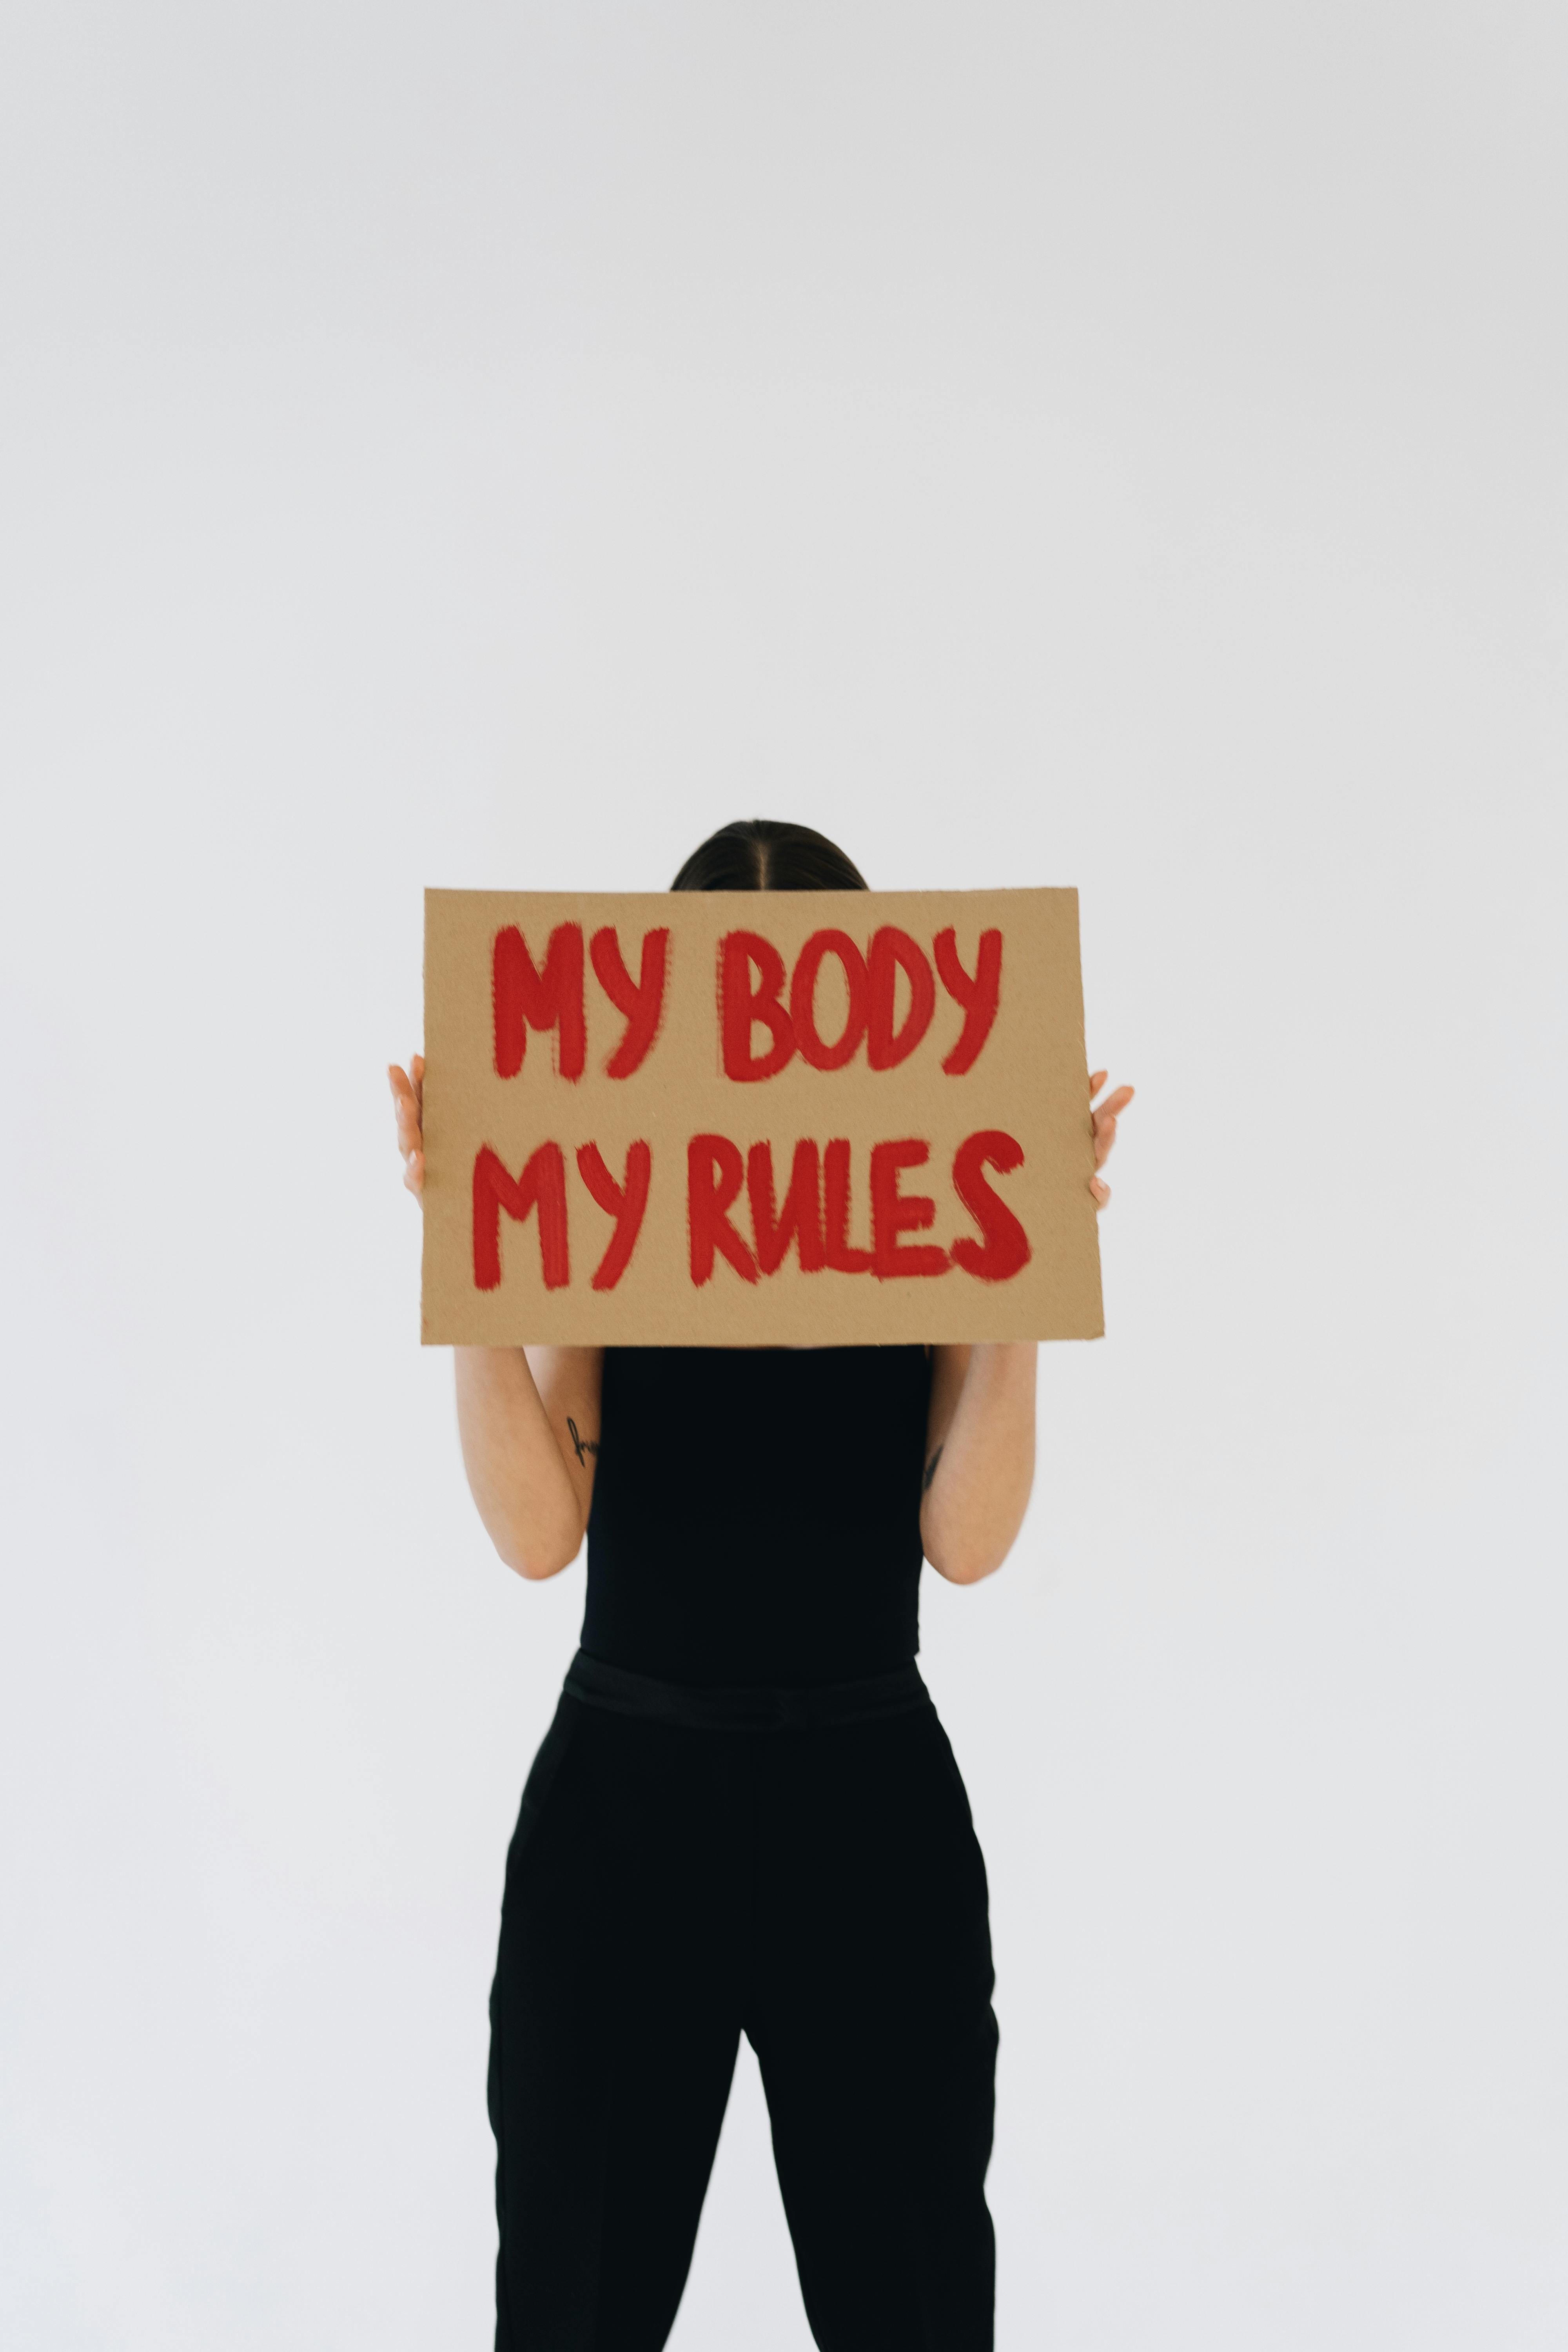 a person in black outfit holding carboard with message